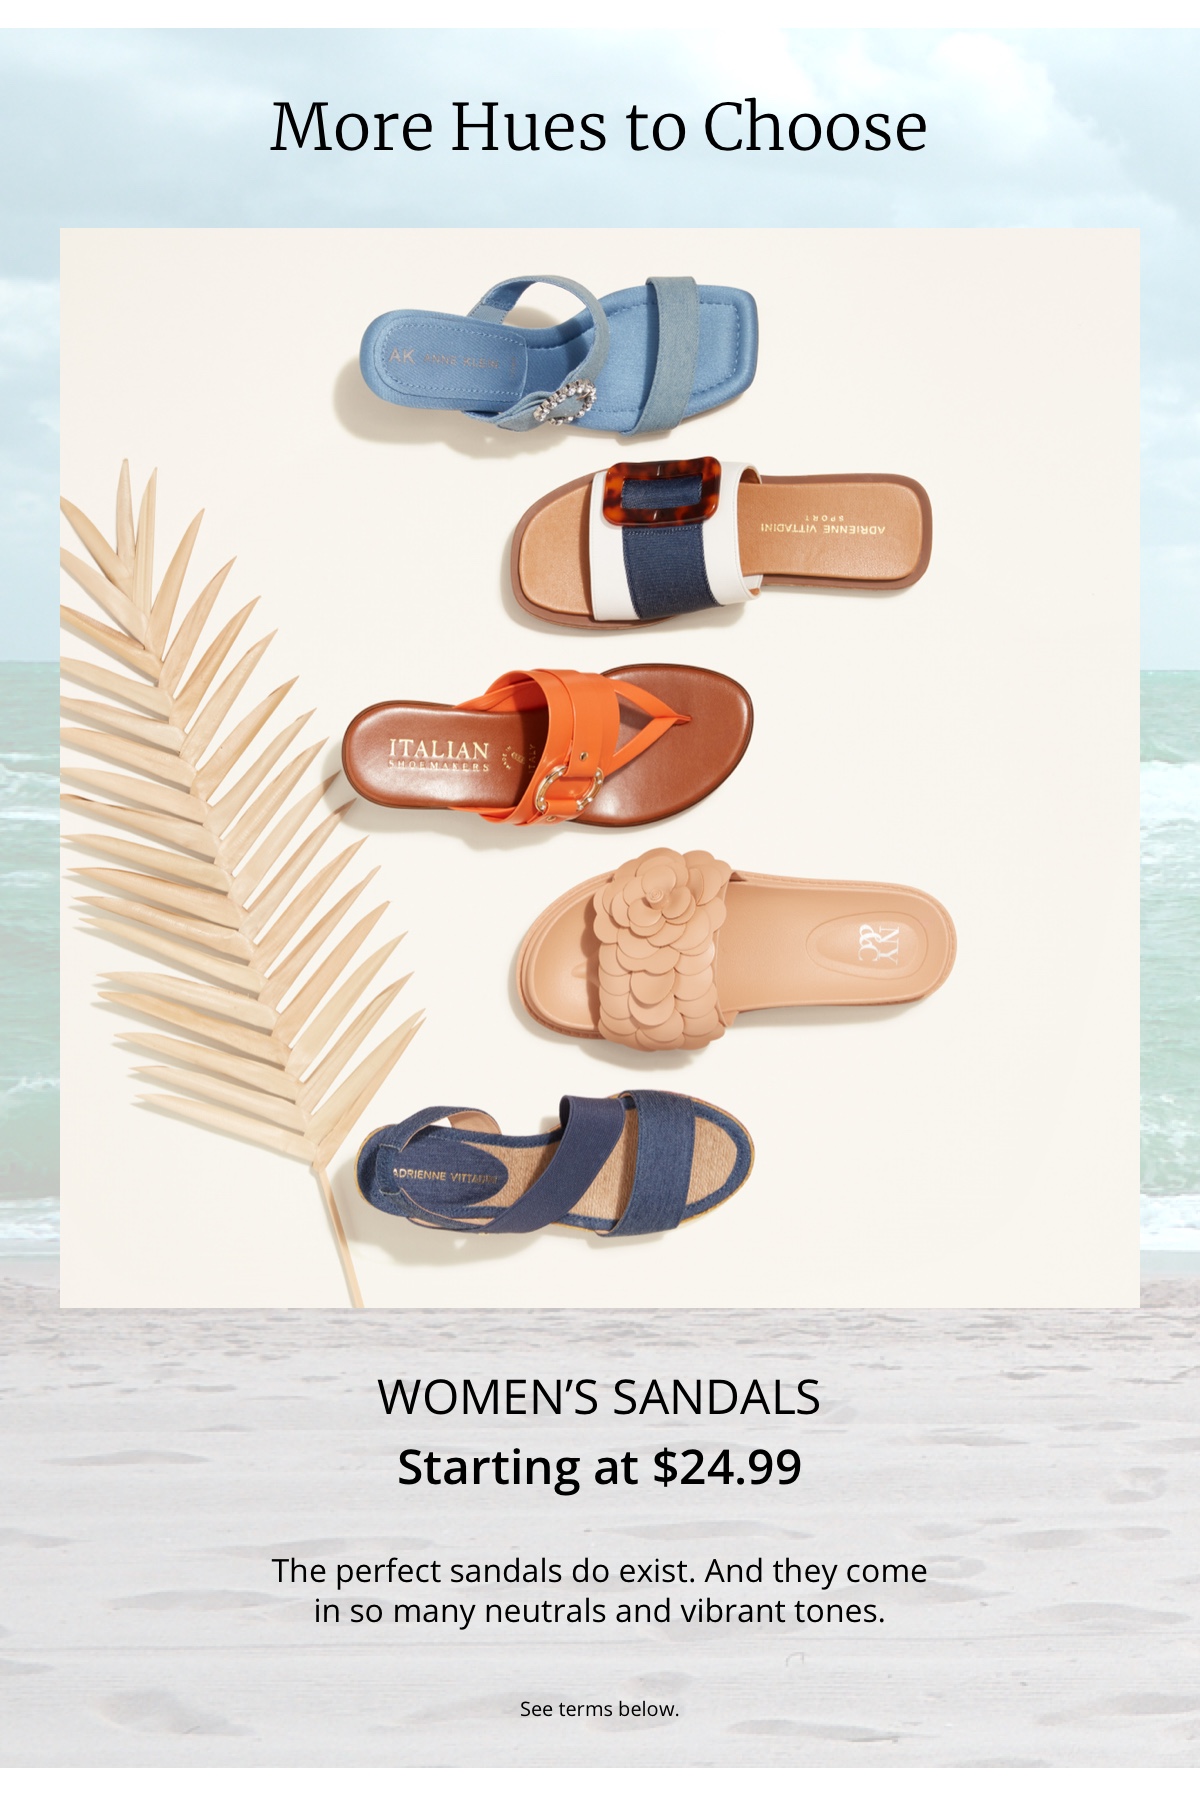 More Hues to Choose|Womens Sandals|Starting at $24.99|The perfect sandals do exist. And they come|in so many neutrals and vibrant tones.|See terms below.